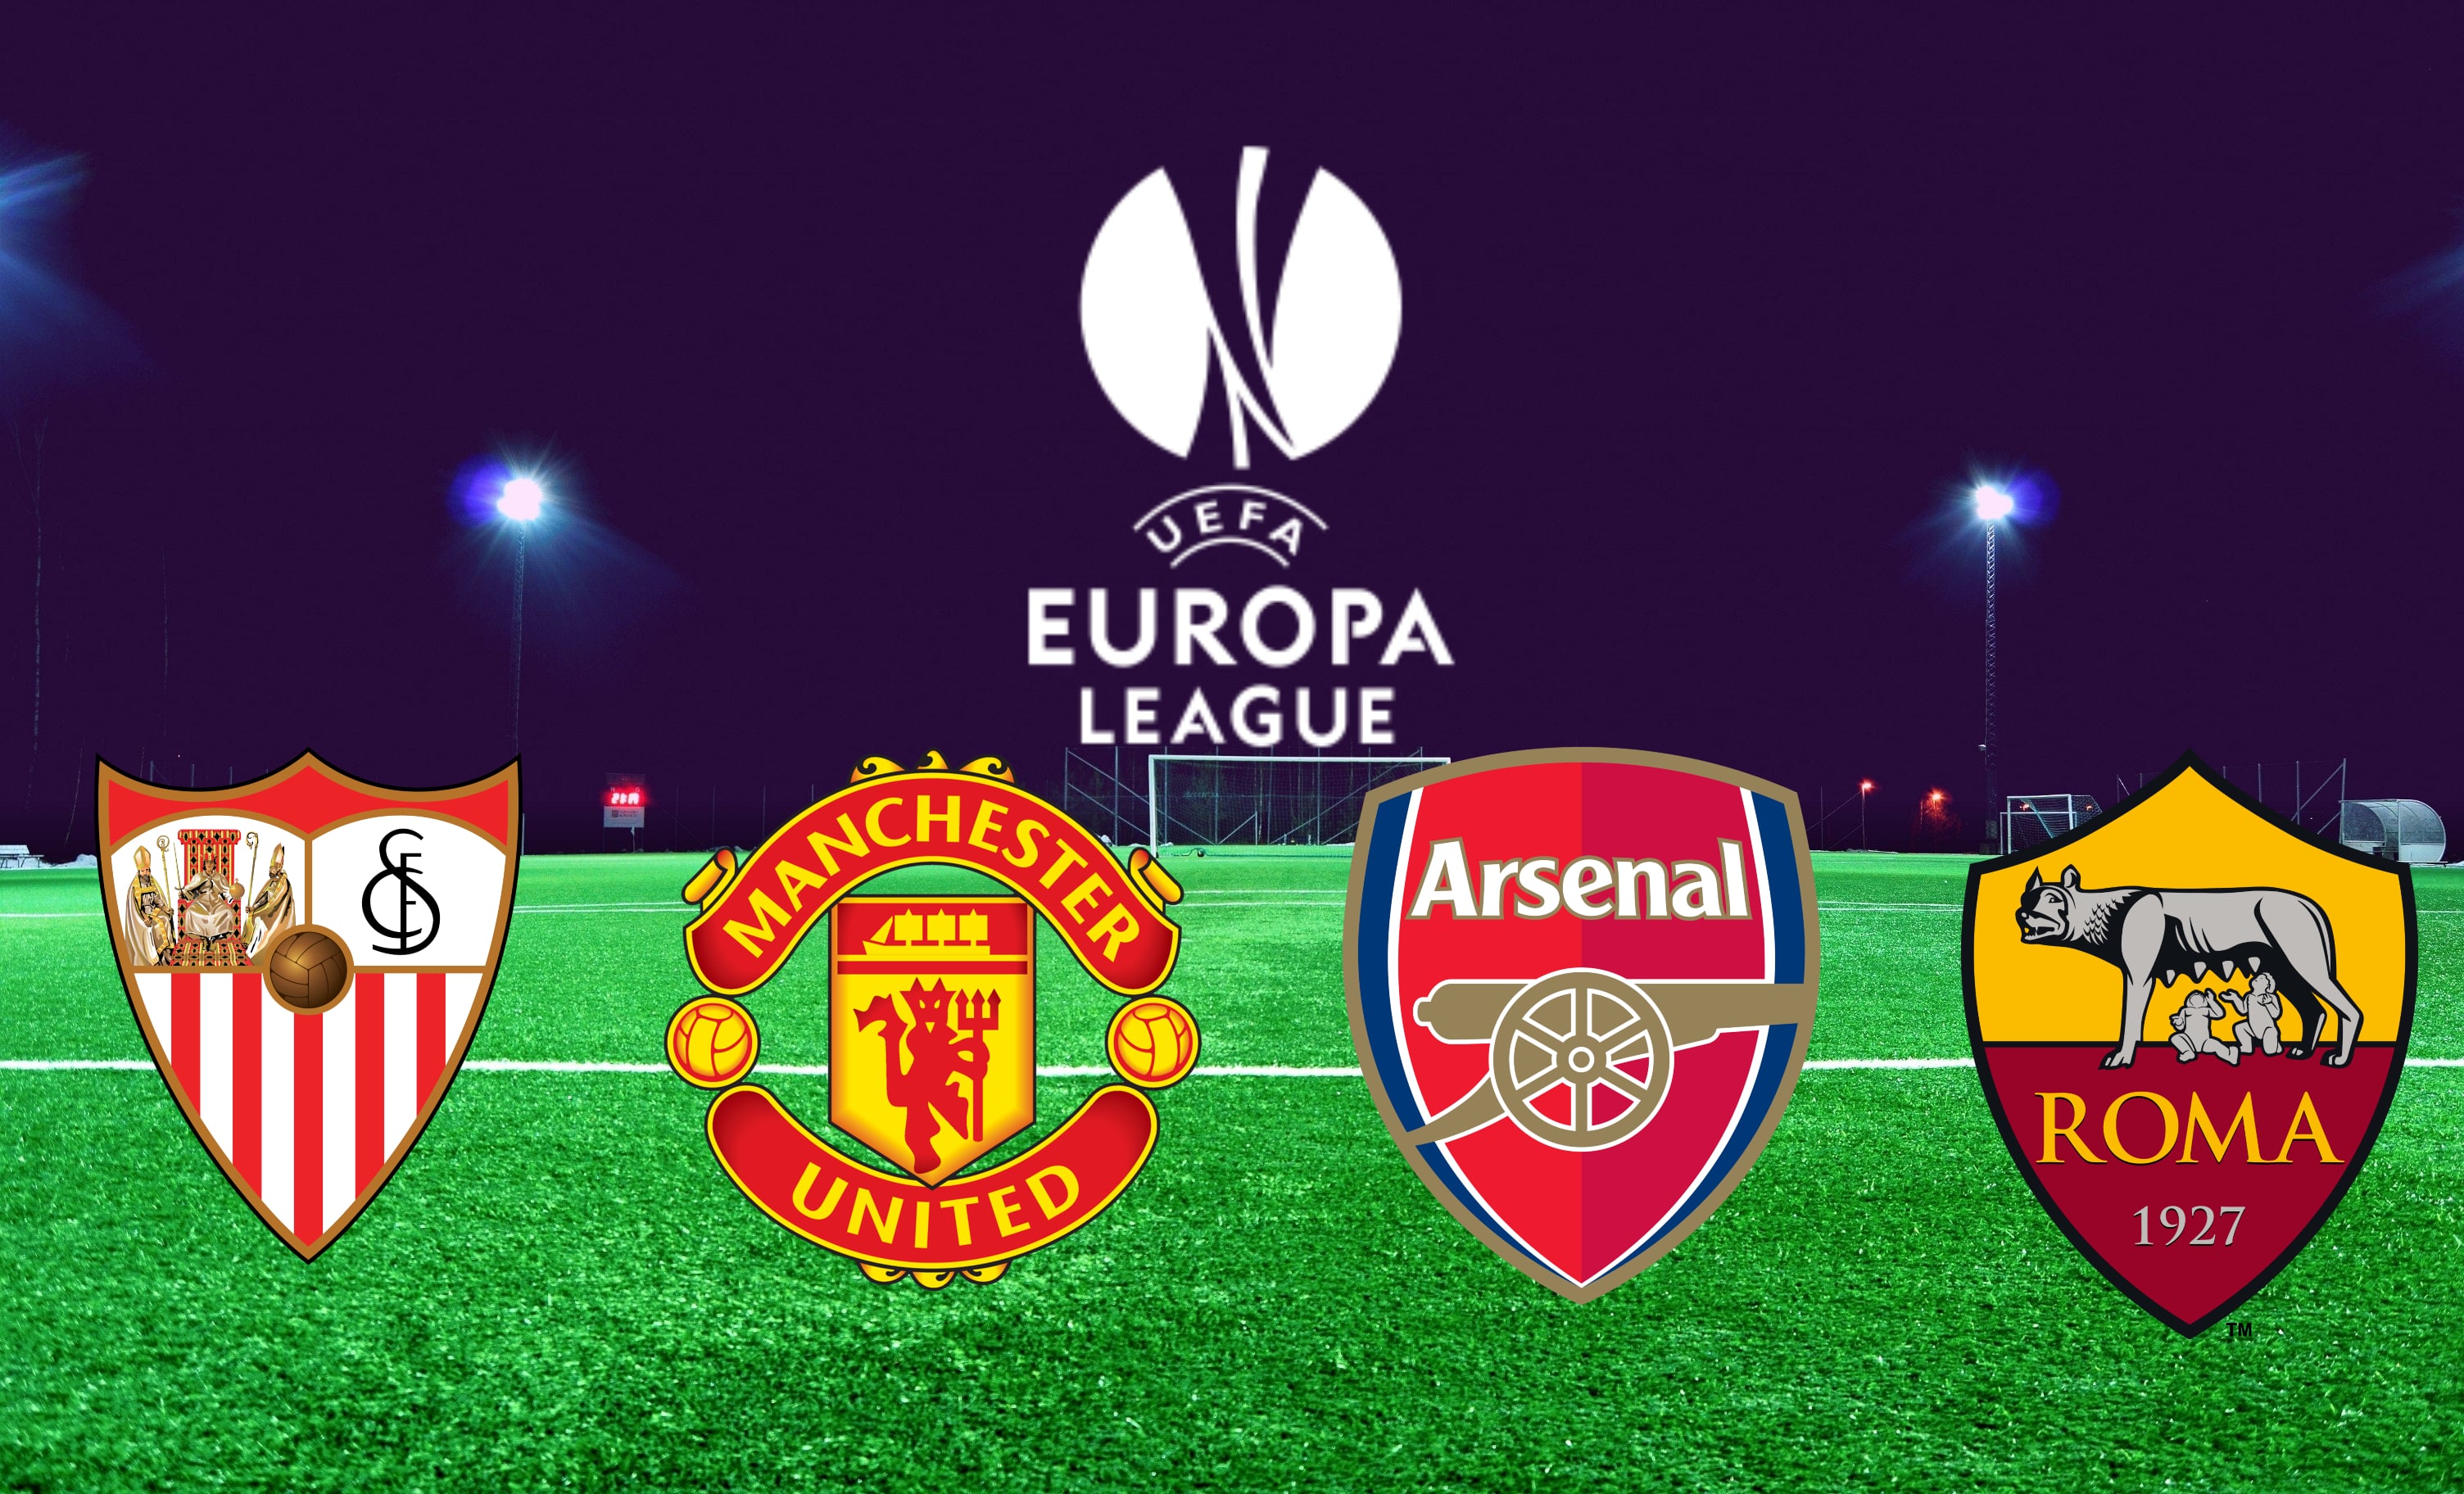 Europa League 2019-20 Teams that Progress to the Group Stage Without Qualification